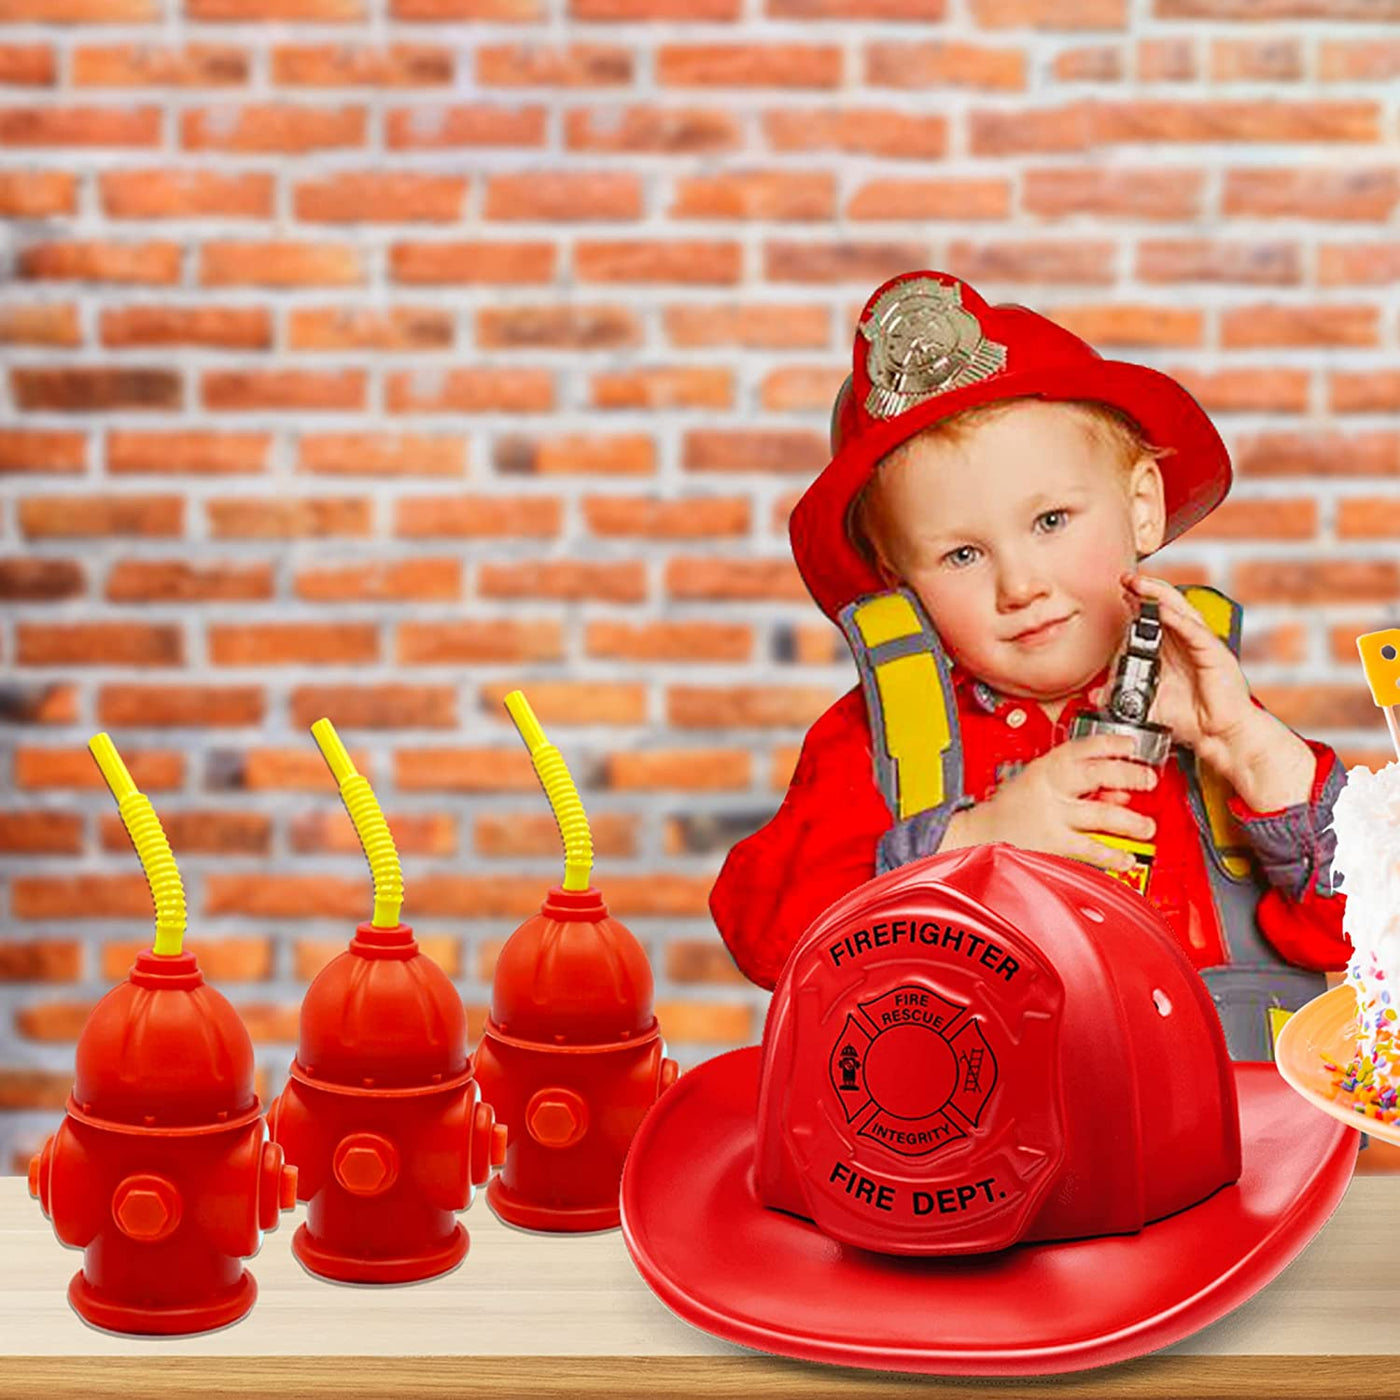 4E's Novelty Fire Hydrant Straw Cups With Lids (4 Pack) 12oz - for Firefighter Birthday Party Favors, Fire truck & Fireman Party Decorations, Rescue Marshall Party